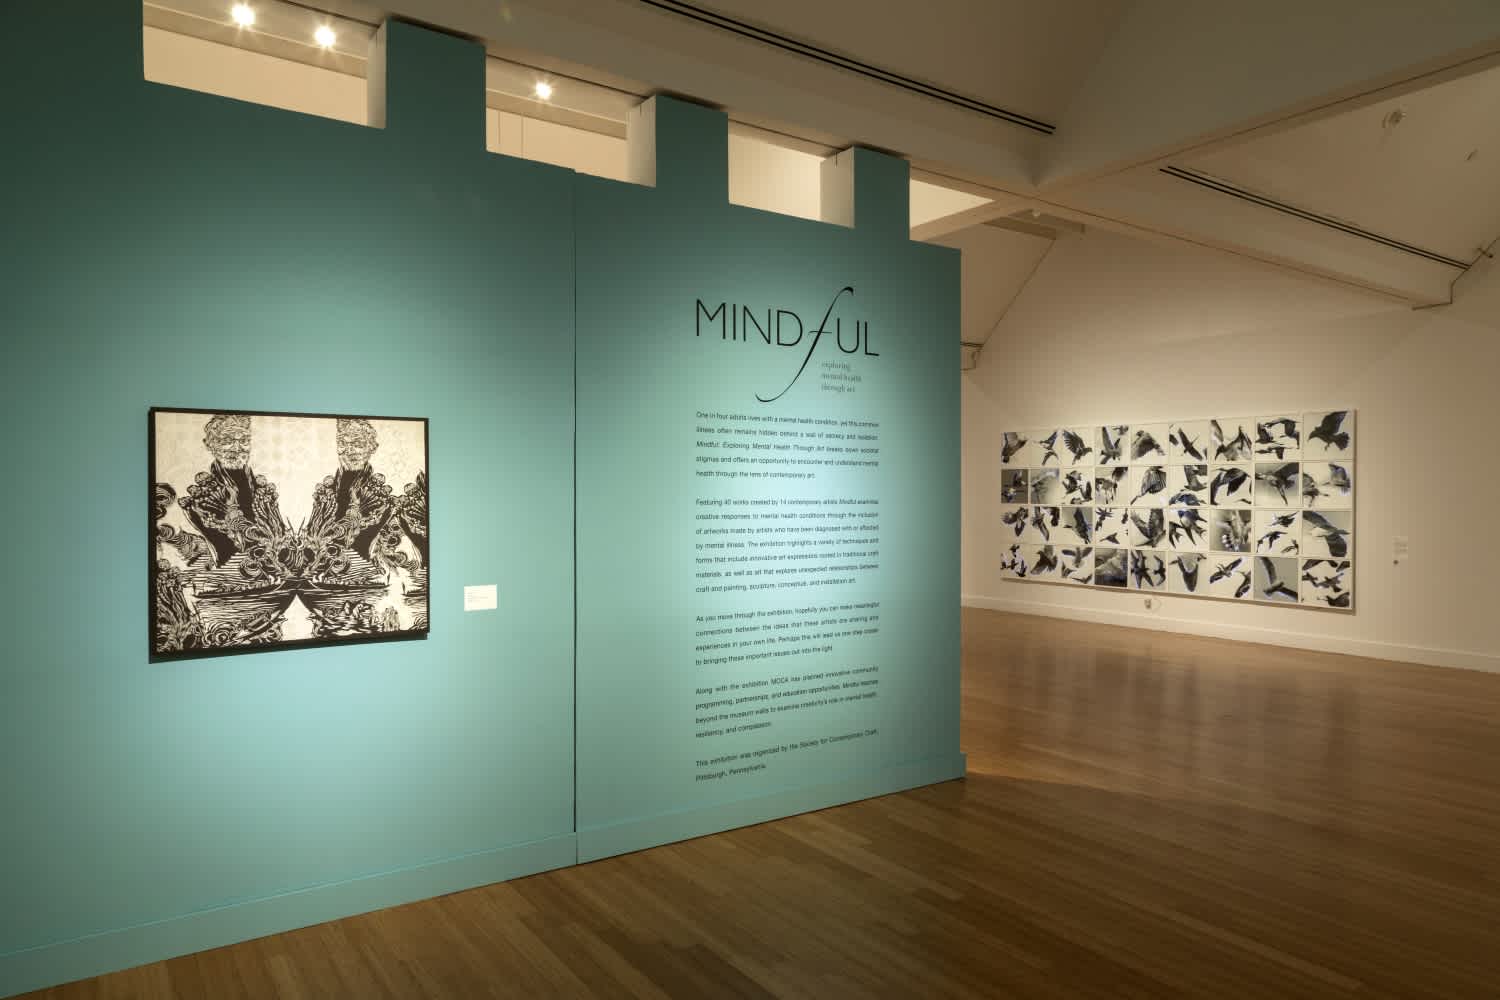 Installation photograph of the beginning of the exhibition Mindful: Exploring Mental Health Through art in the Virginia MOCA galleries. The wall is robin egg blue and introduces the exhibition.